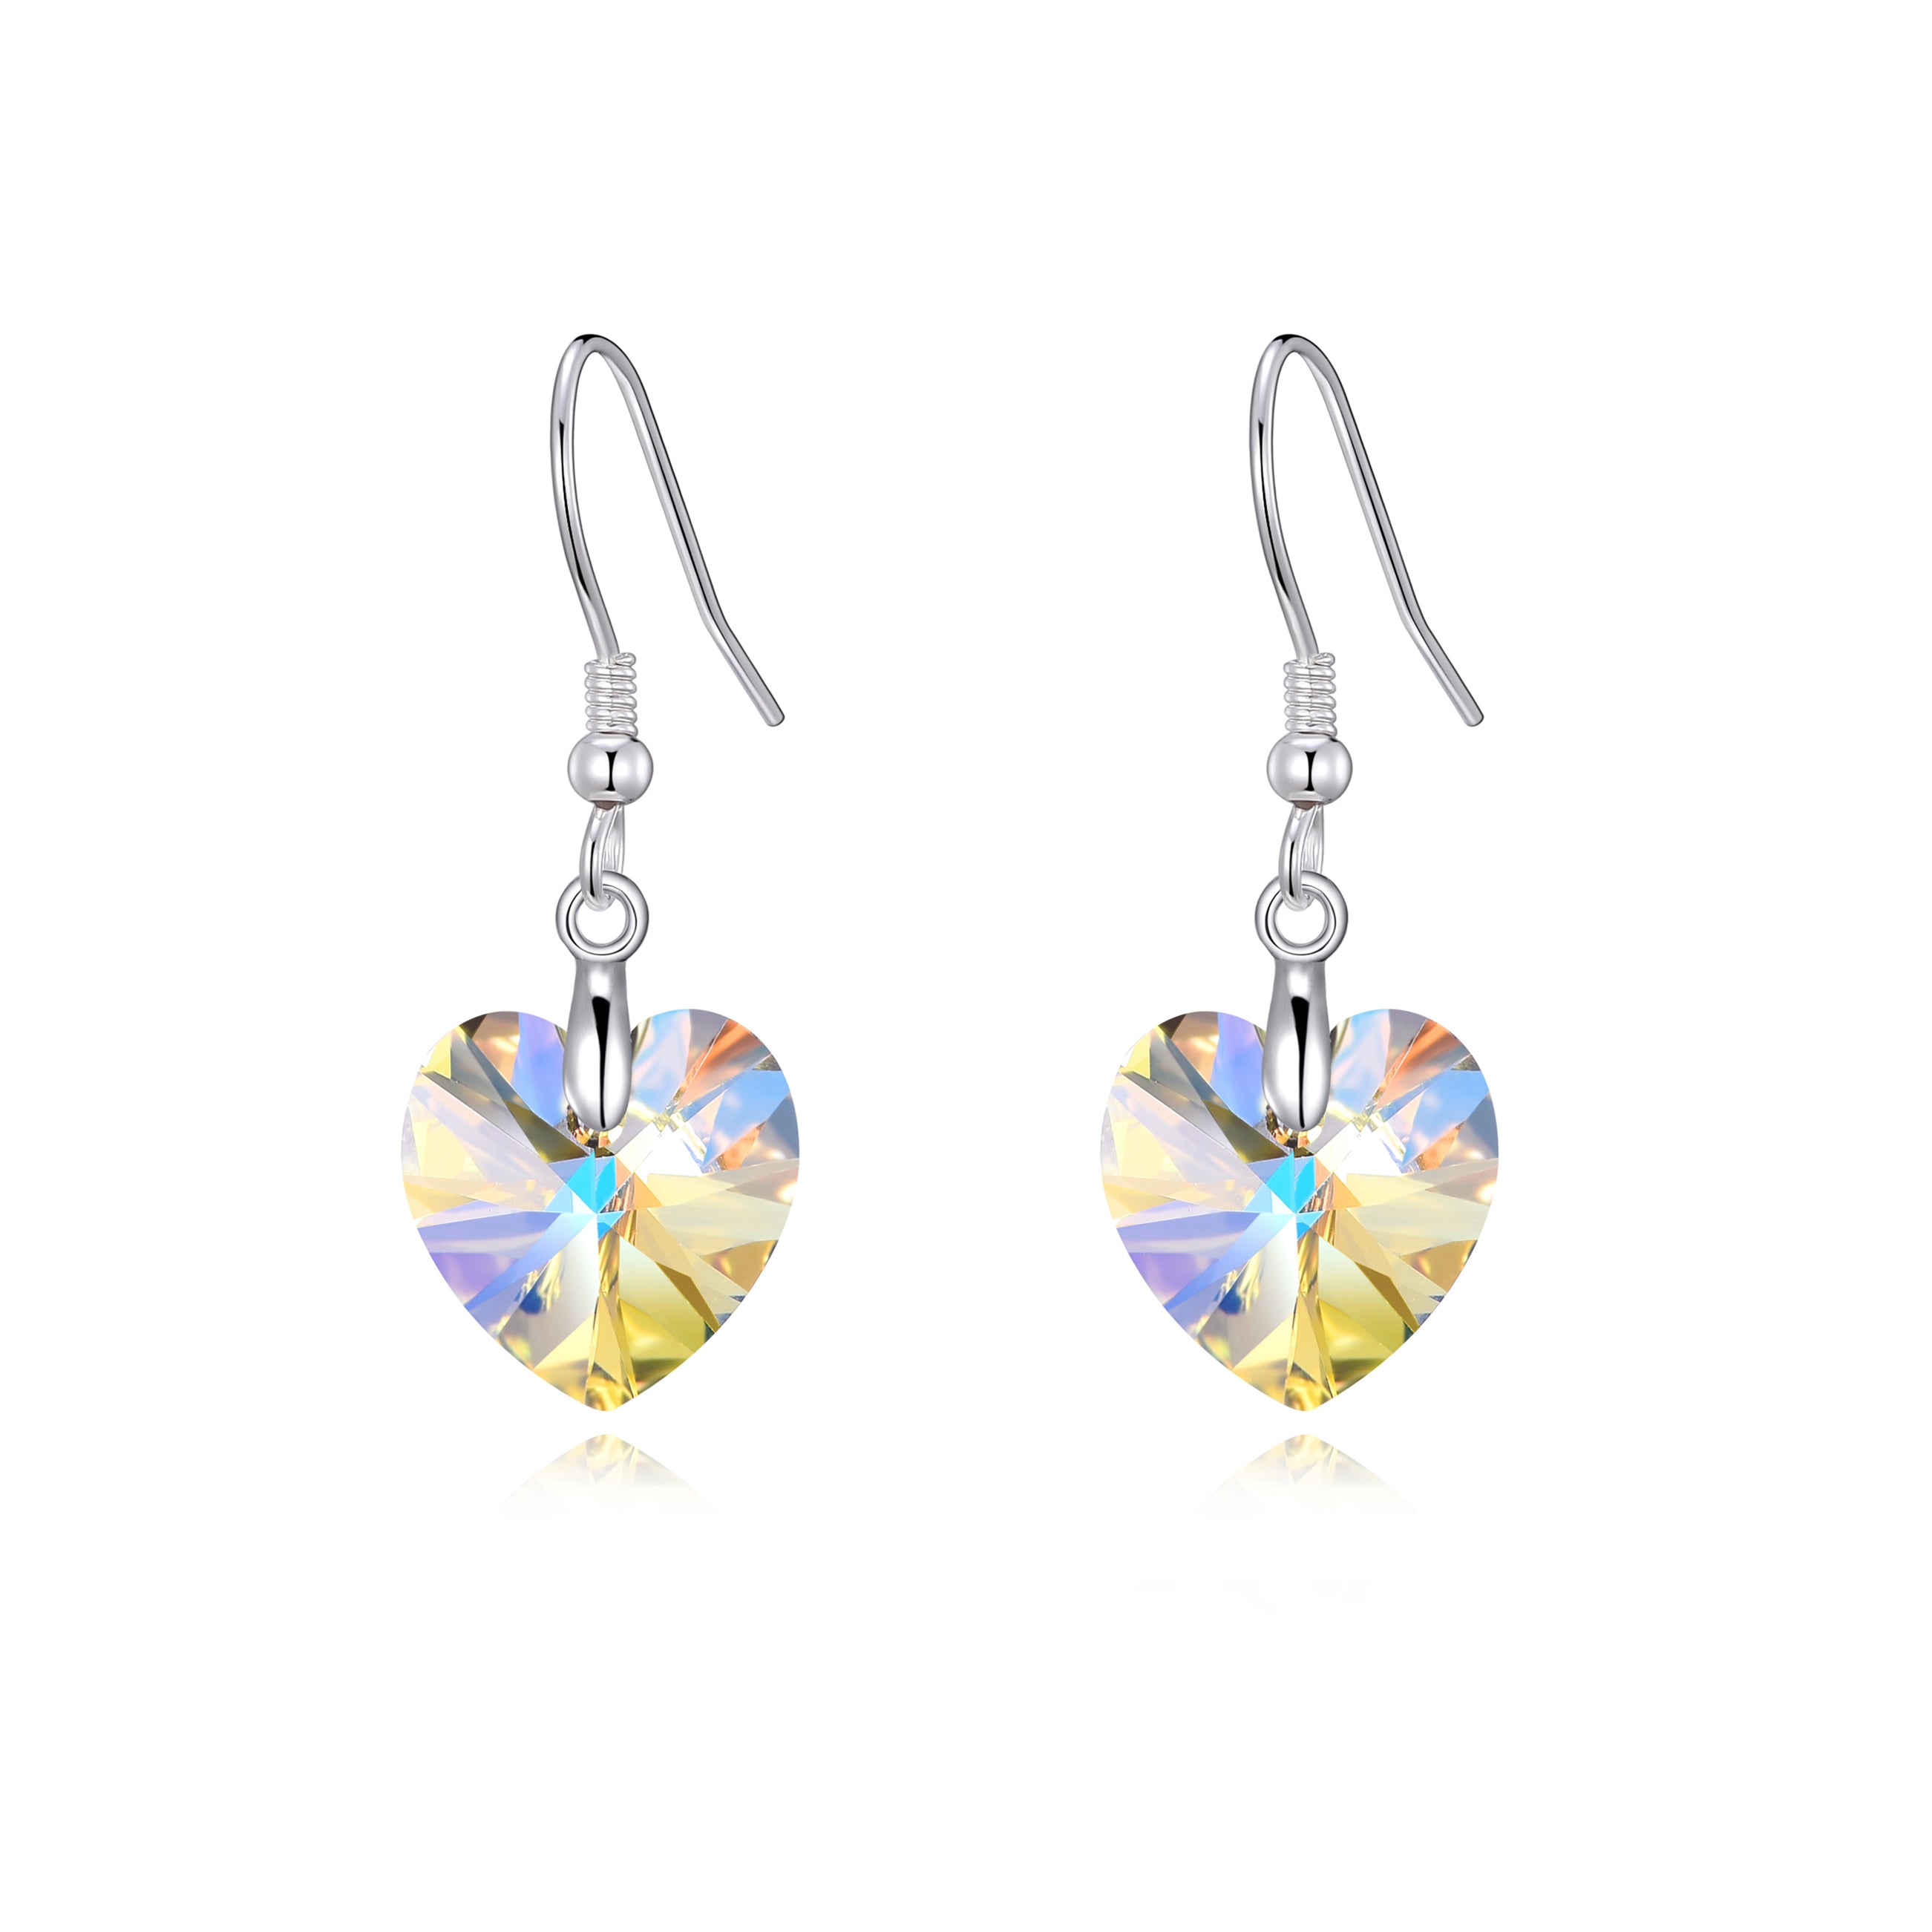 Sterling Silver Aurora Borealis Heart Earrings Created with Zircondia® Crystals by Philip Jones Jewellery